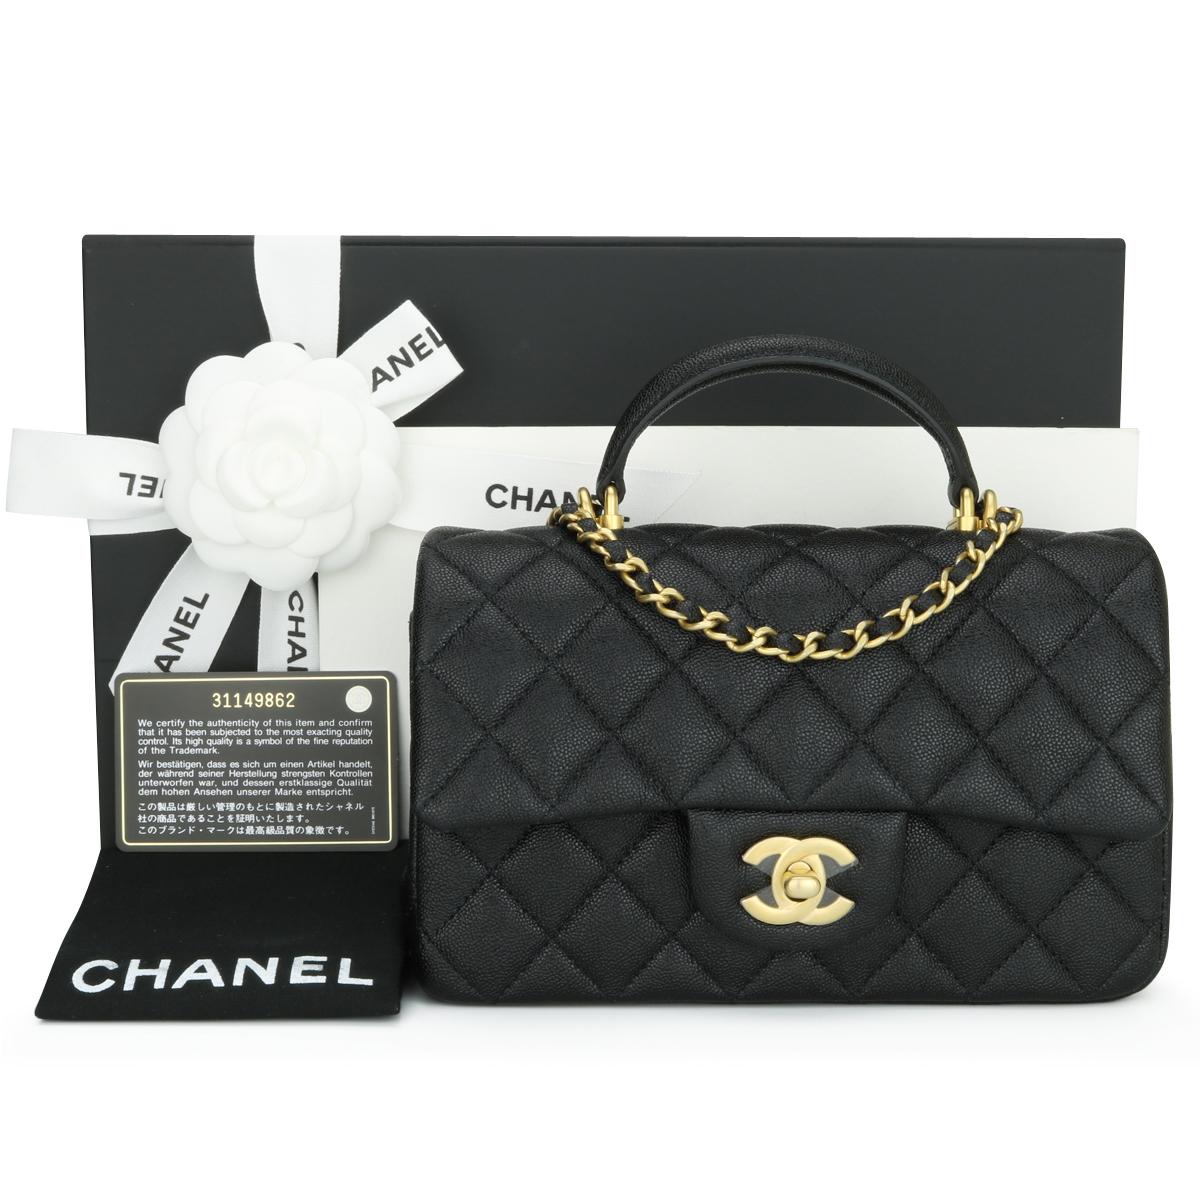 CHANEL Rectangular Mini Top Handle Flap Bag Black Caviar with Brushed Gold Hardware 2021.

This stunning bag is still in brand new condition; the bag still holds the original shape, and the hardware is still shiny.

An extremely rare piece since